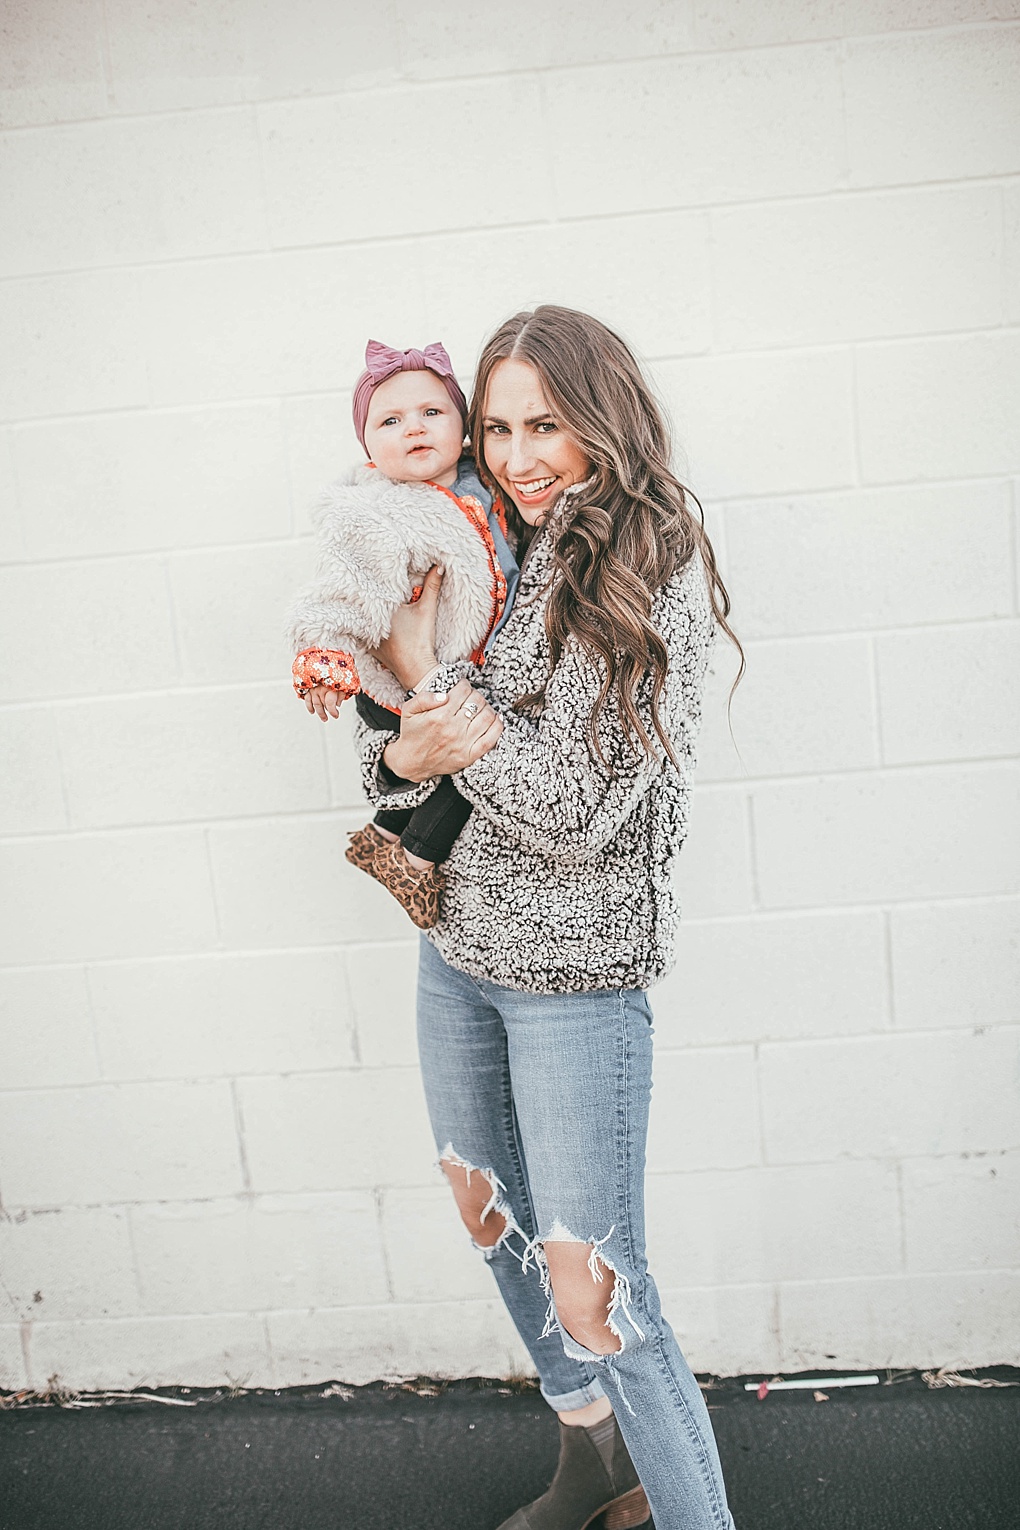 Did you see the Nordstrom Cyber Sale happening right now? Utah Style Blogger Dani Marie is sharing her top picks from the Nordstrom Cyber Sale here!